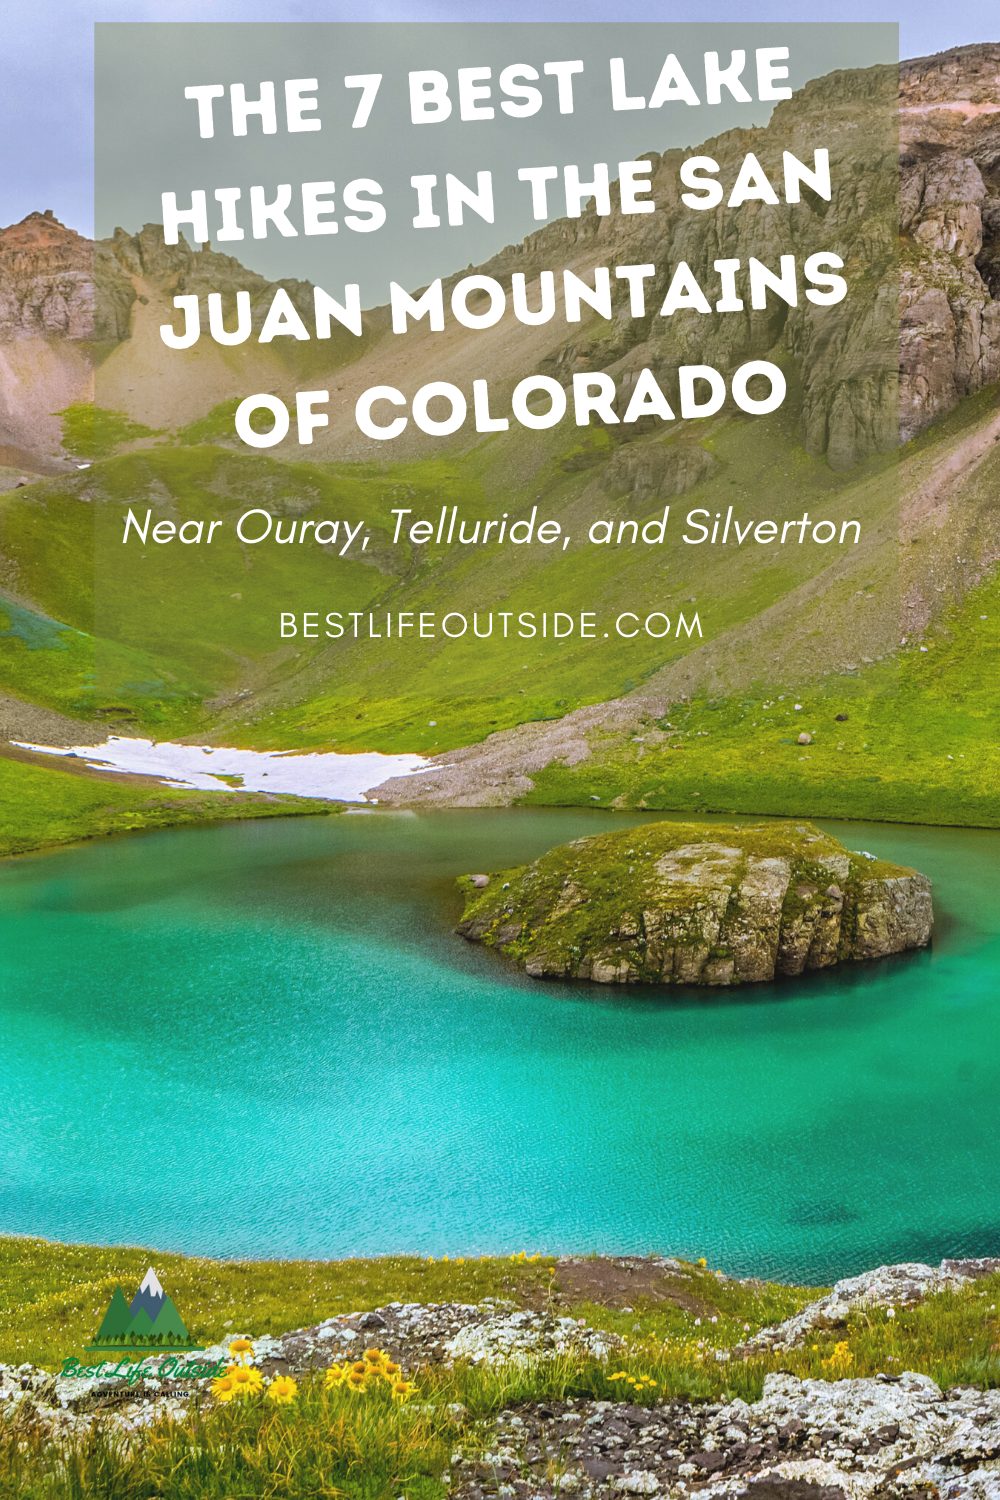 The 7 Best Lake Hikes in the San Juan Mountains - Best Life Outside